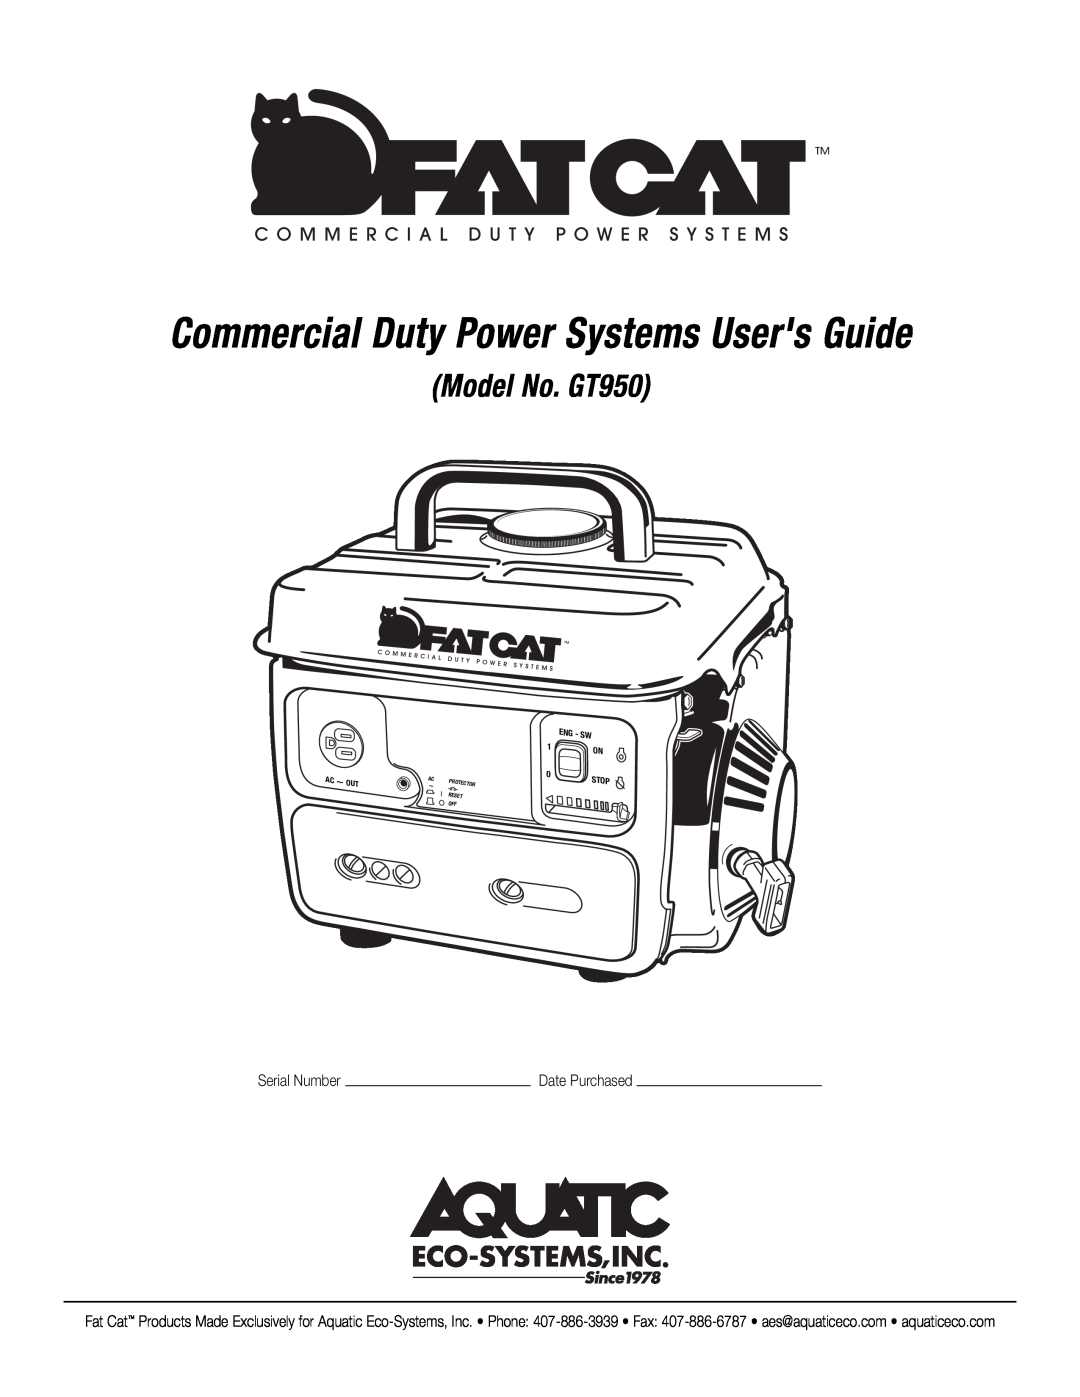 CAT manual Commercial Duty Power Systems Users Guide, Model No. GT950, Protector Reset Off, Stop, Ac ~ 